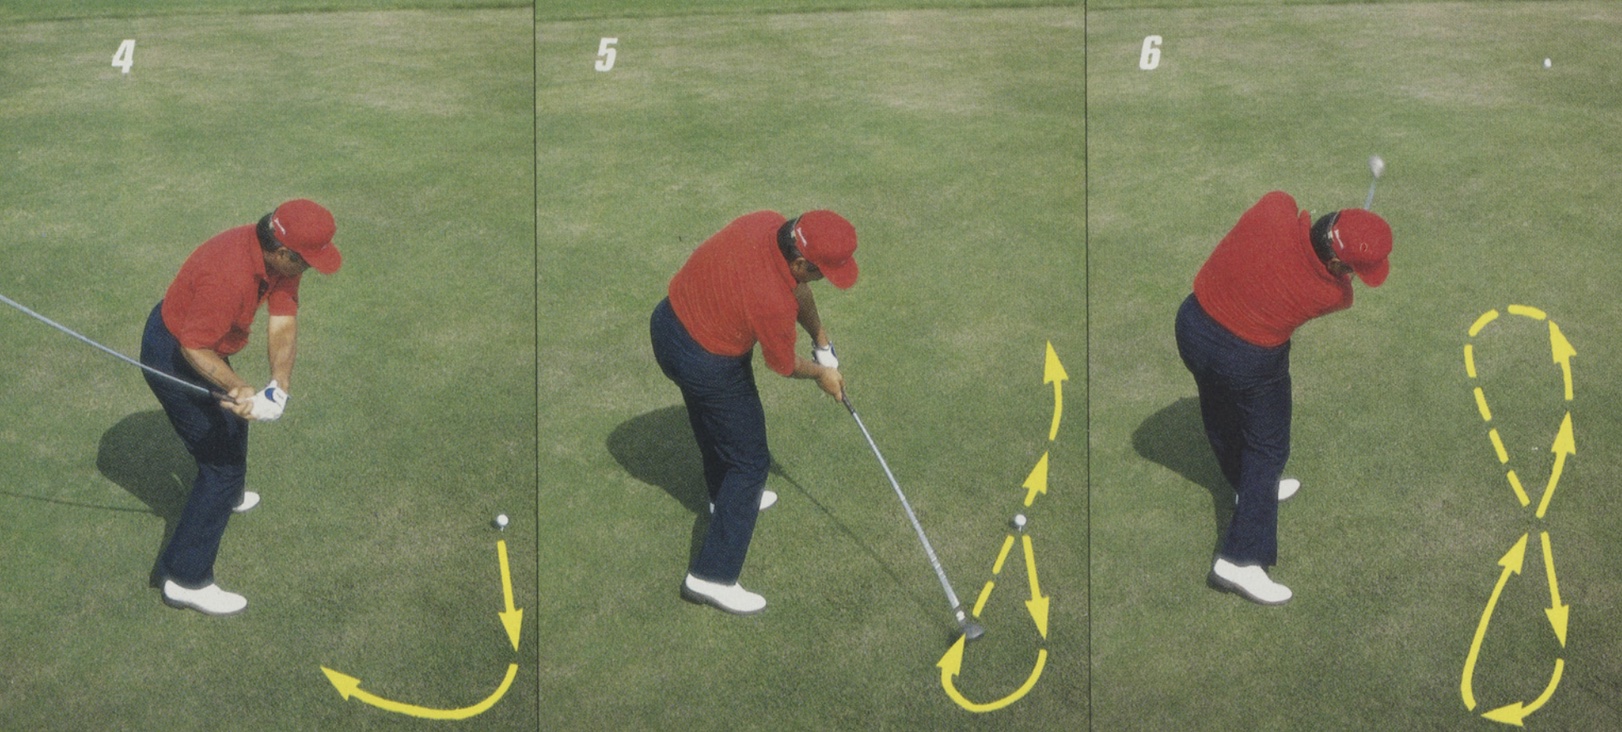 Lee Trevino: I 'guarantee' you'll fix your slice with one of these six tips  | Instruction | Golf Digest